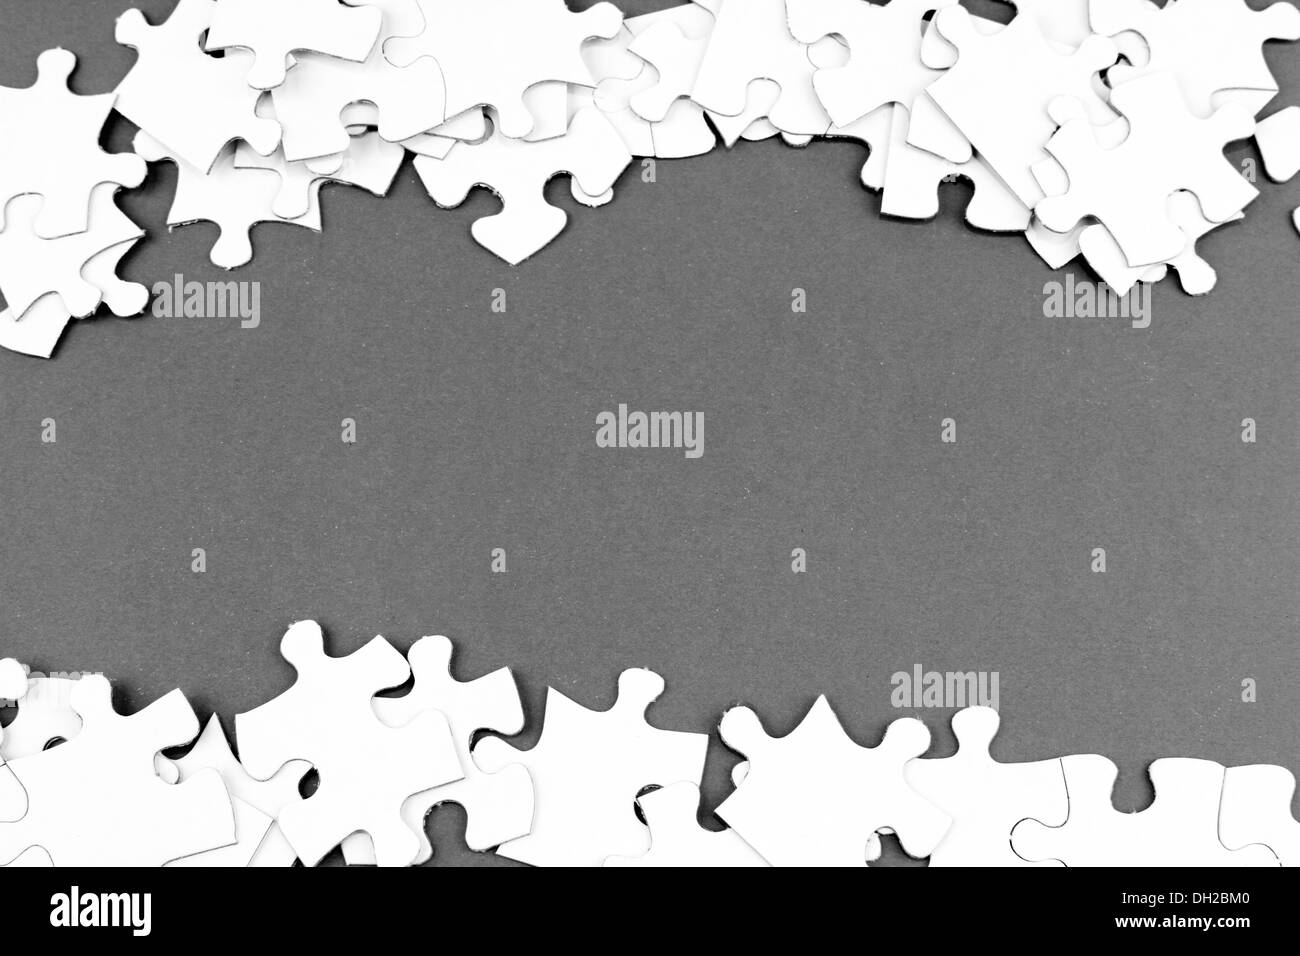 Loose jigsaw puzzle pieces on gray background Stock Photo